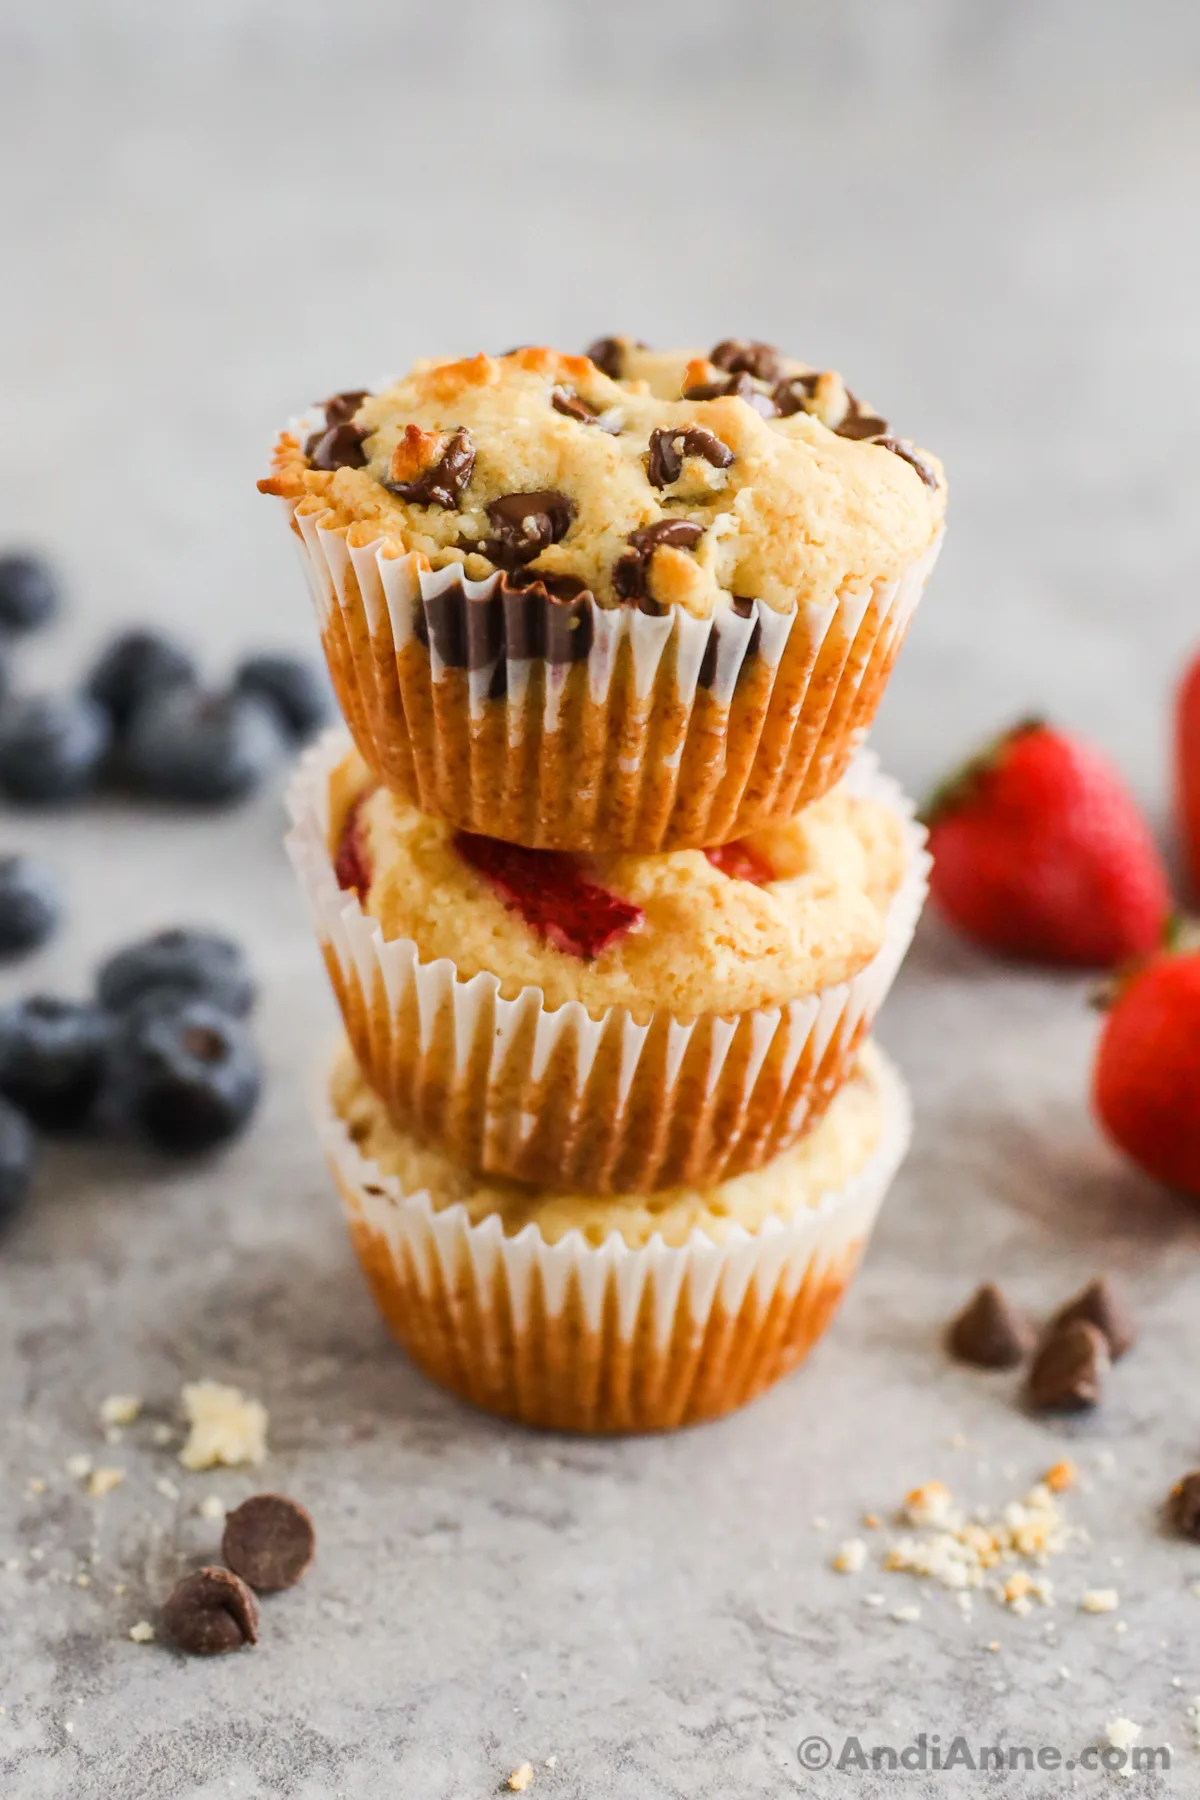 A stack of three pancake muffins with chocolate chips and berries. Behind in background is blueberries, strawberries and some chocolate chips.